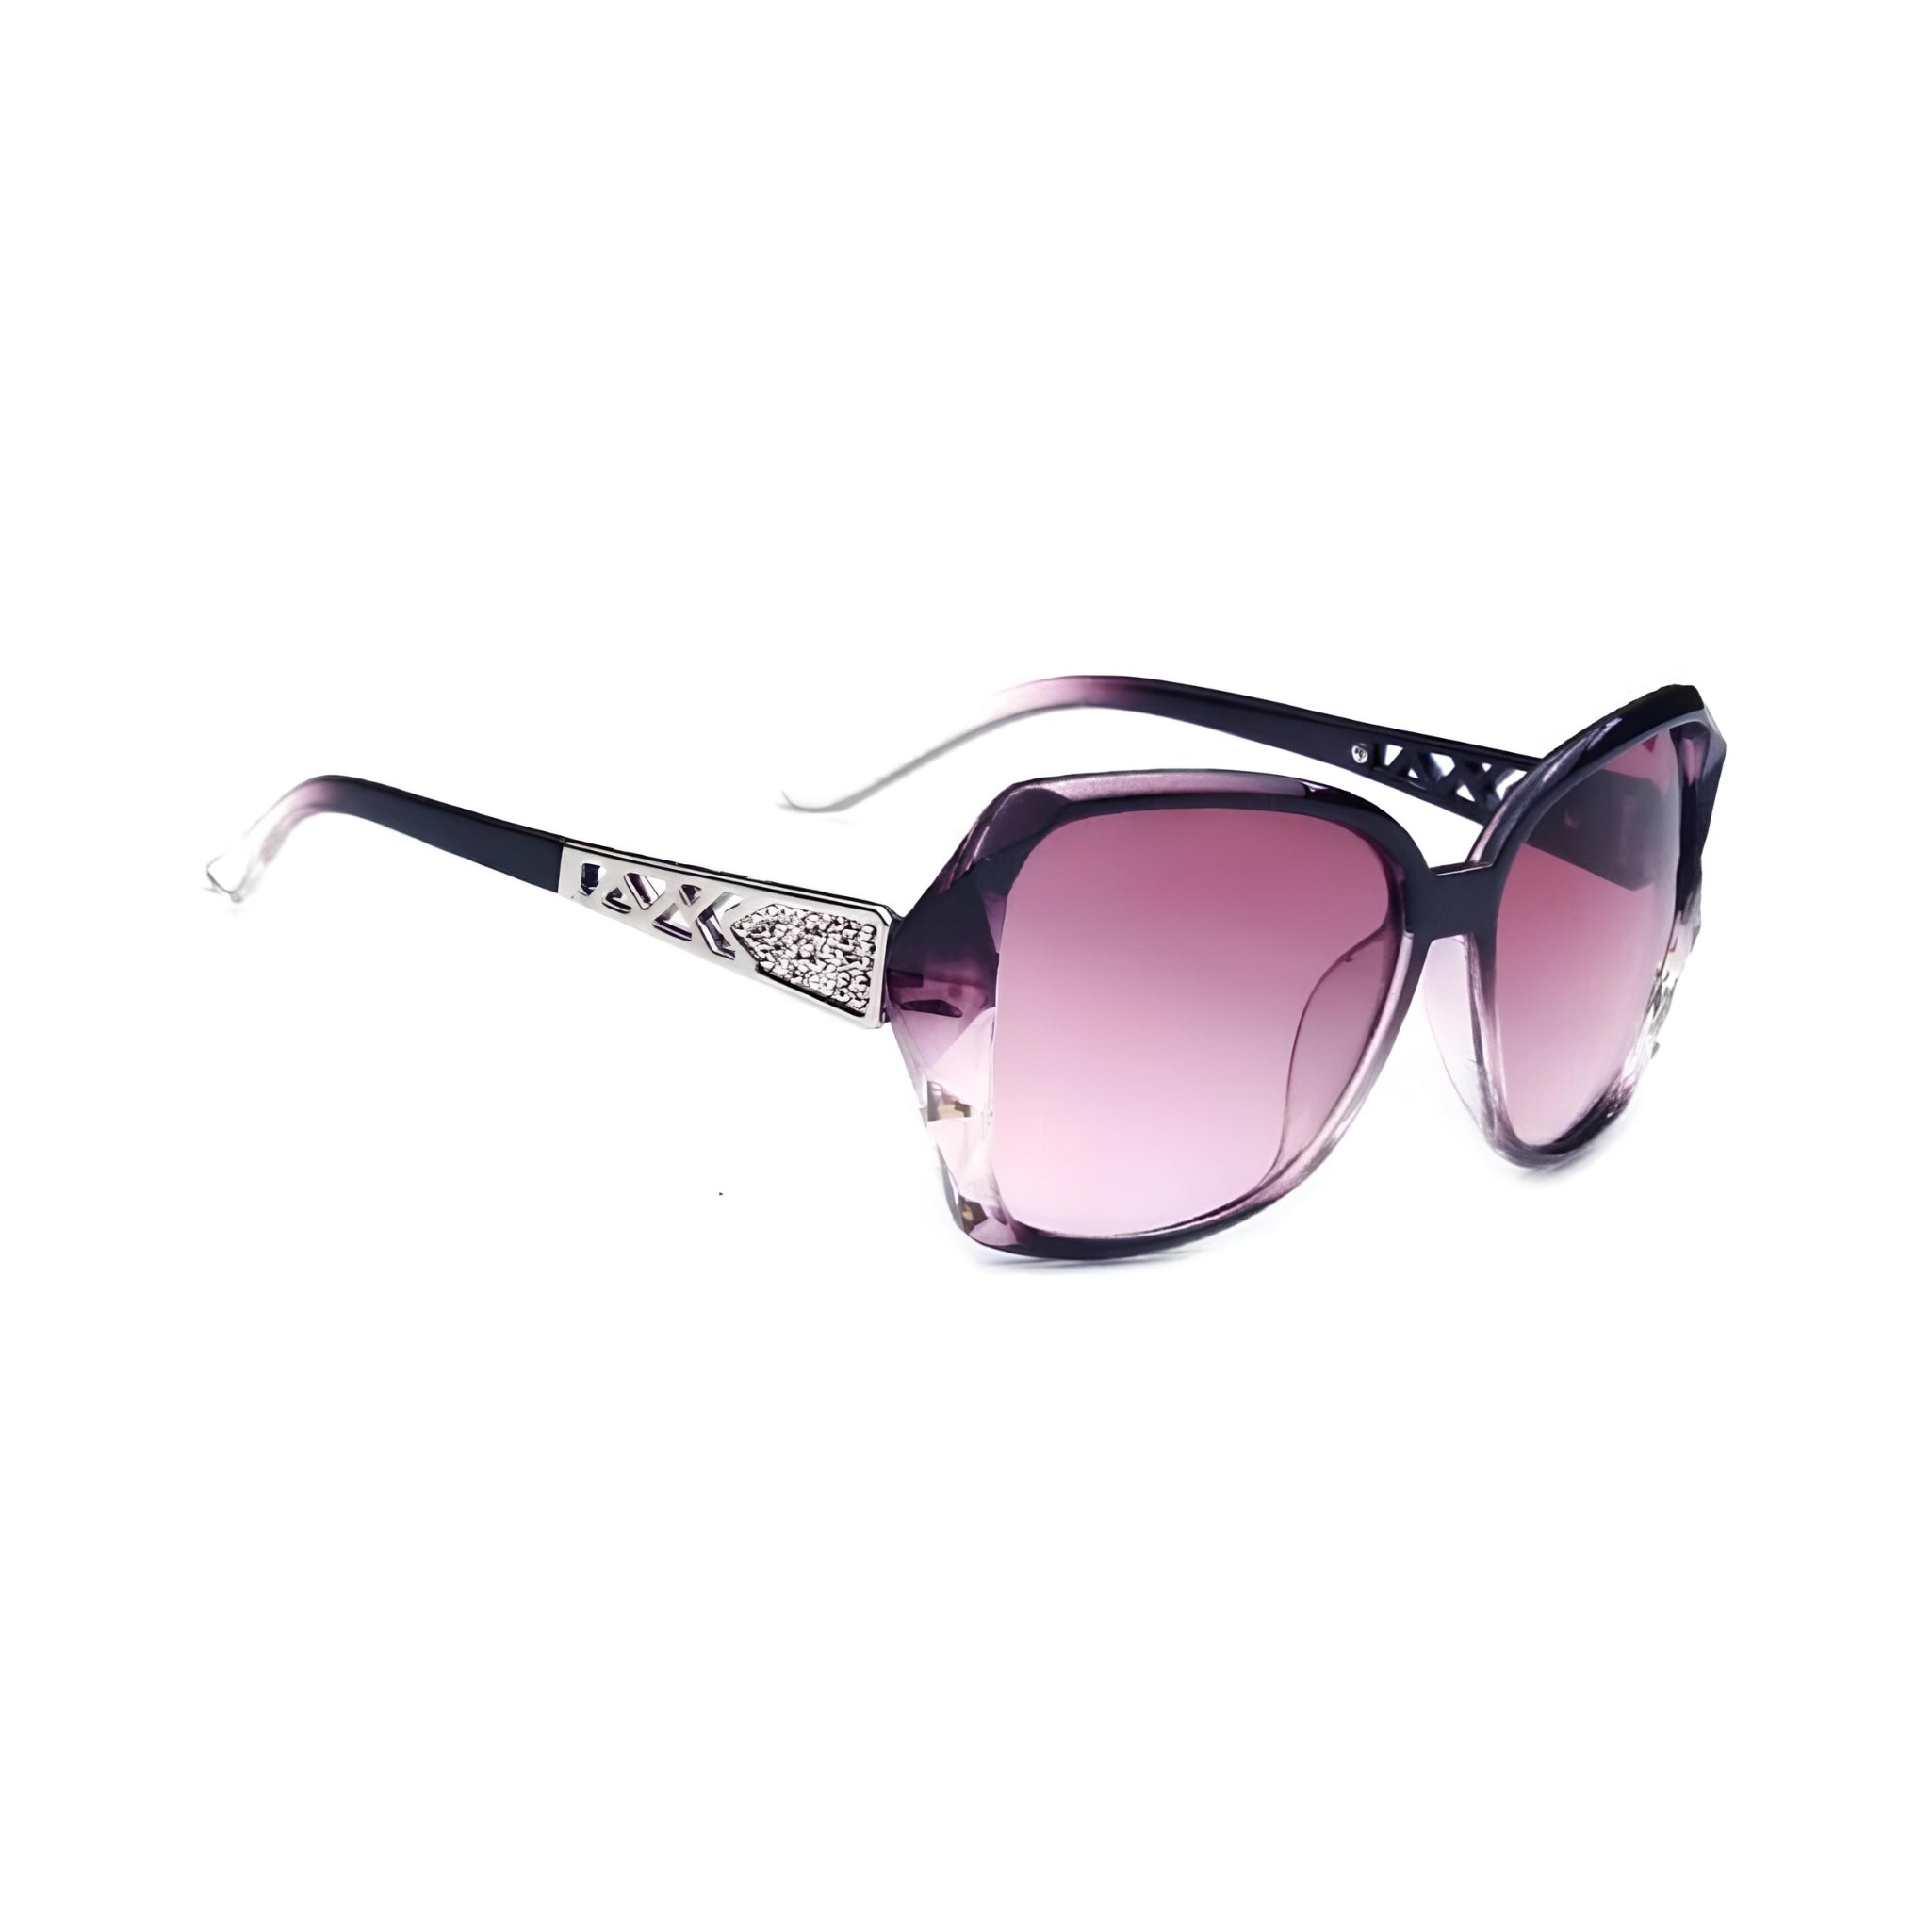 Royal Series Oval Oversized Sunglasses For Women - Purple